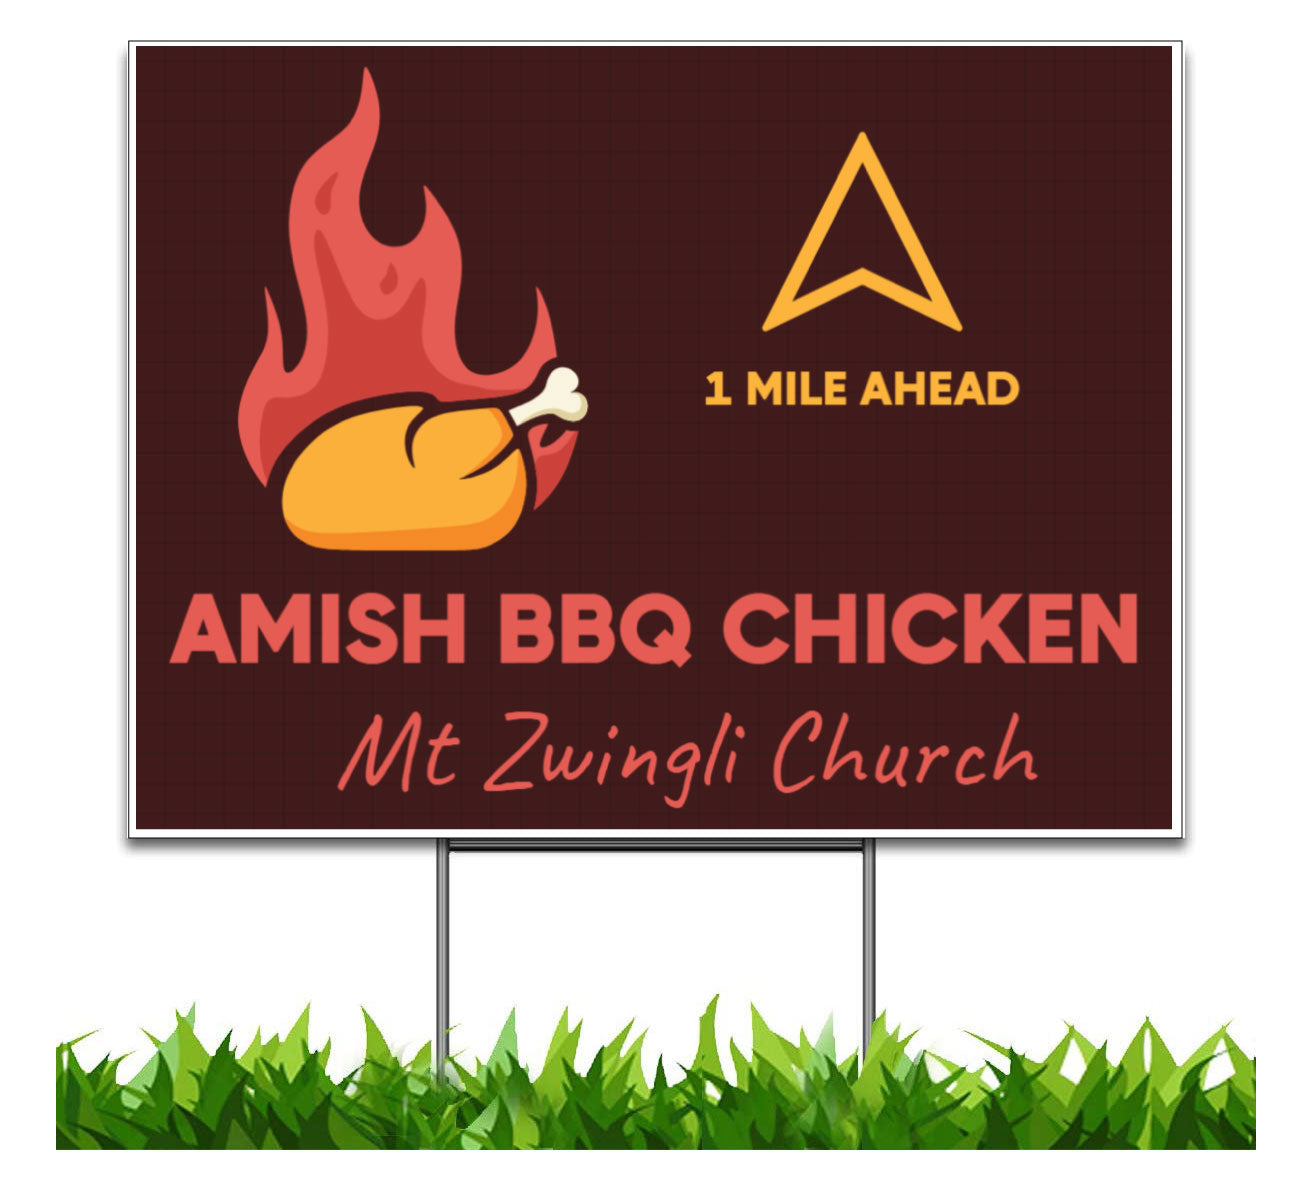 Amish BBQ Chicken 1 Mile Ahead Yard Sign, 24x18 inch Double Sided, H-Stake Included